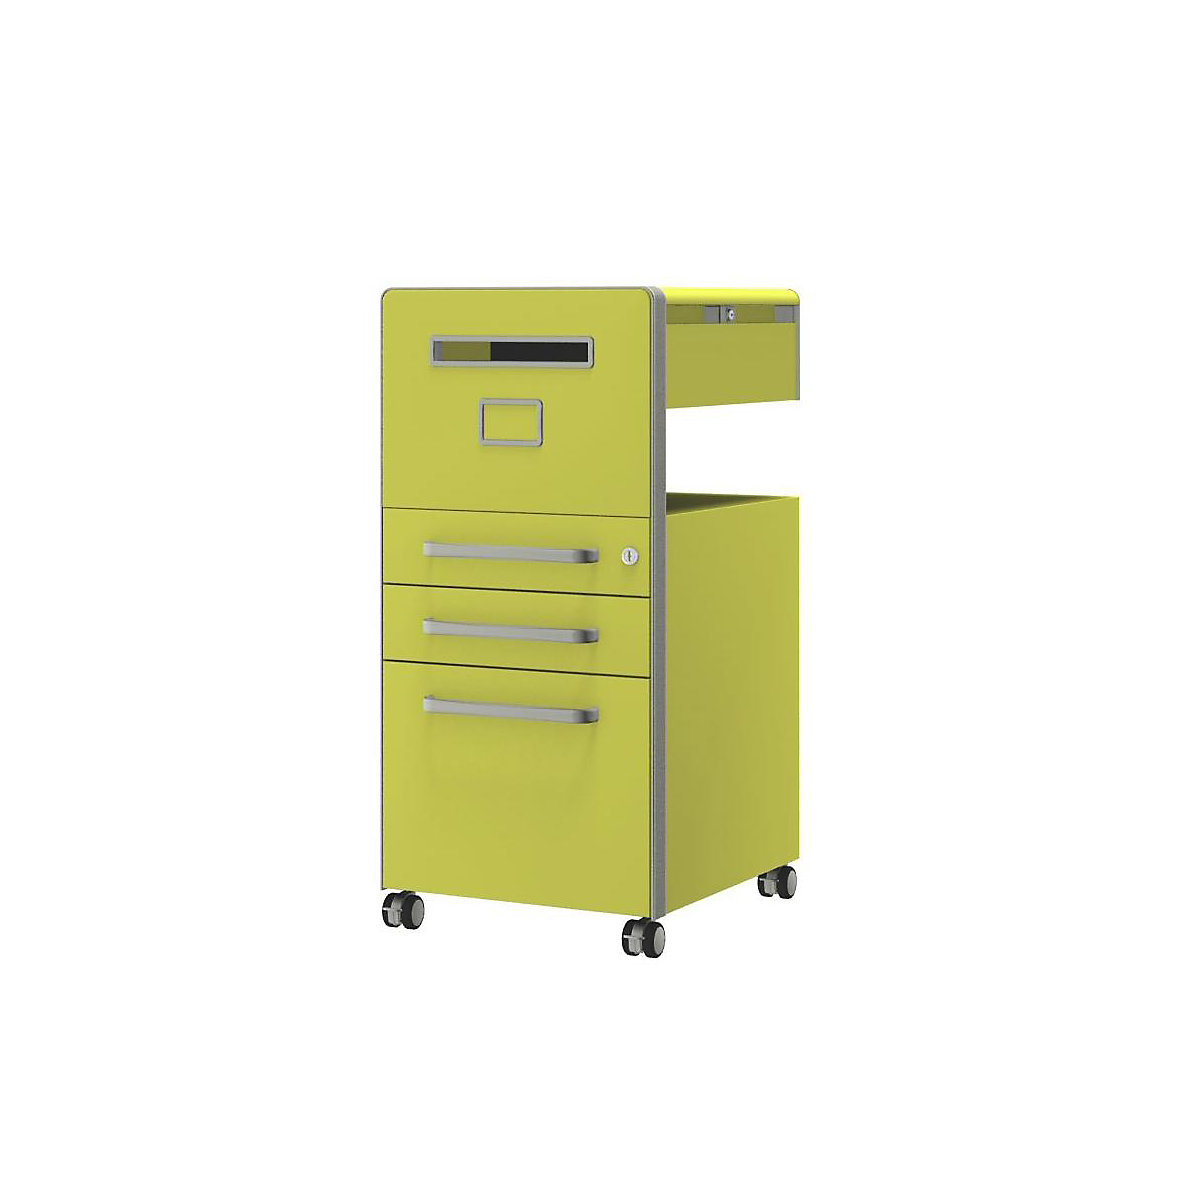 Bite™ pedestal furniture, with 1 whiteboard, opens on the left side – BISLEY, with 2 universal drawers, 1 suspension file drawer, yellow-10